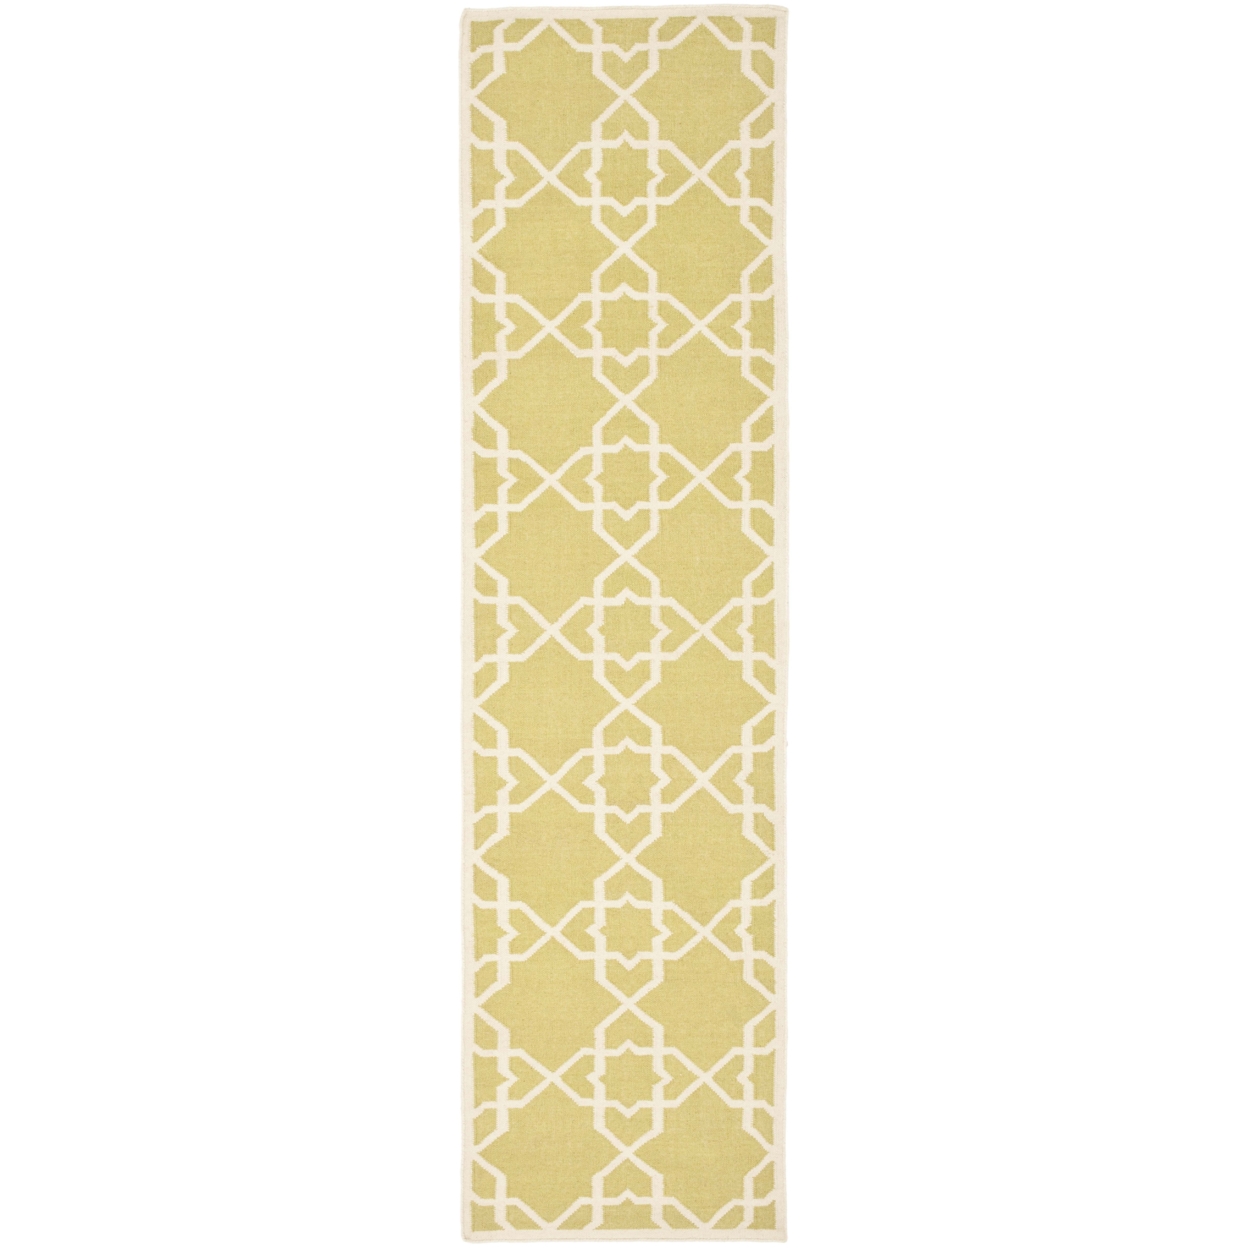 SAFAVIEH Dhurries DHU548A Handwoven Olive / Ivory Rug - 2' 6 X 12'